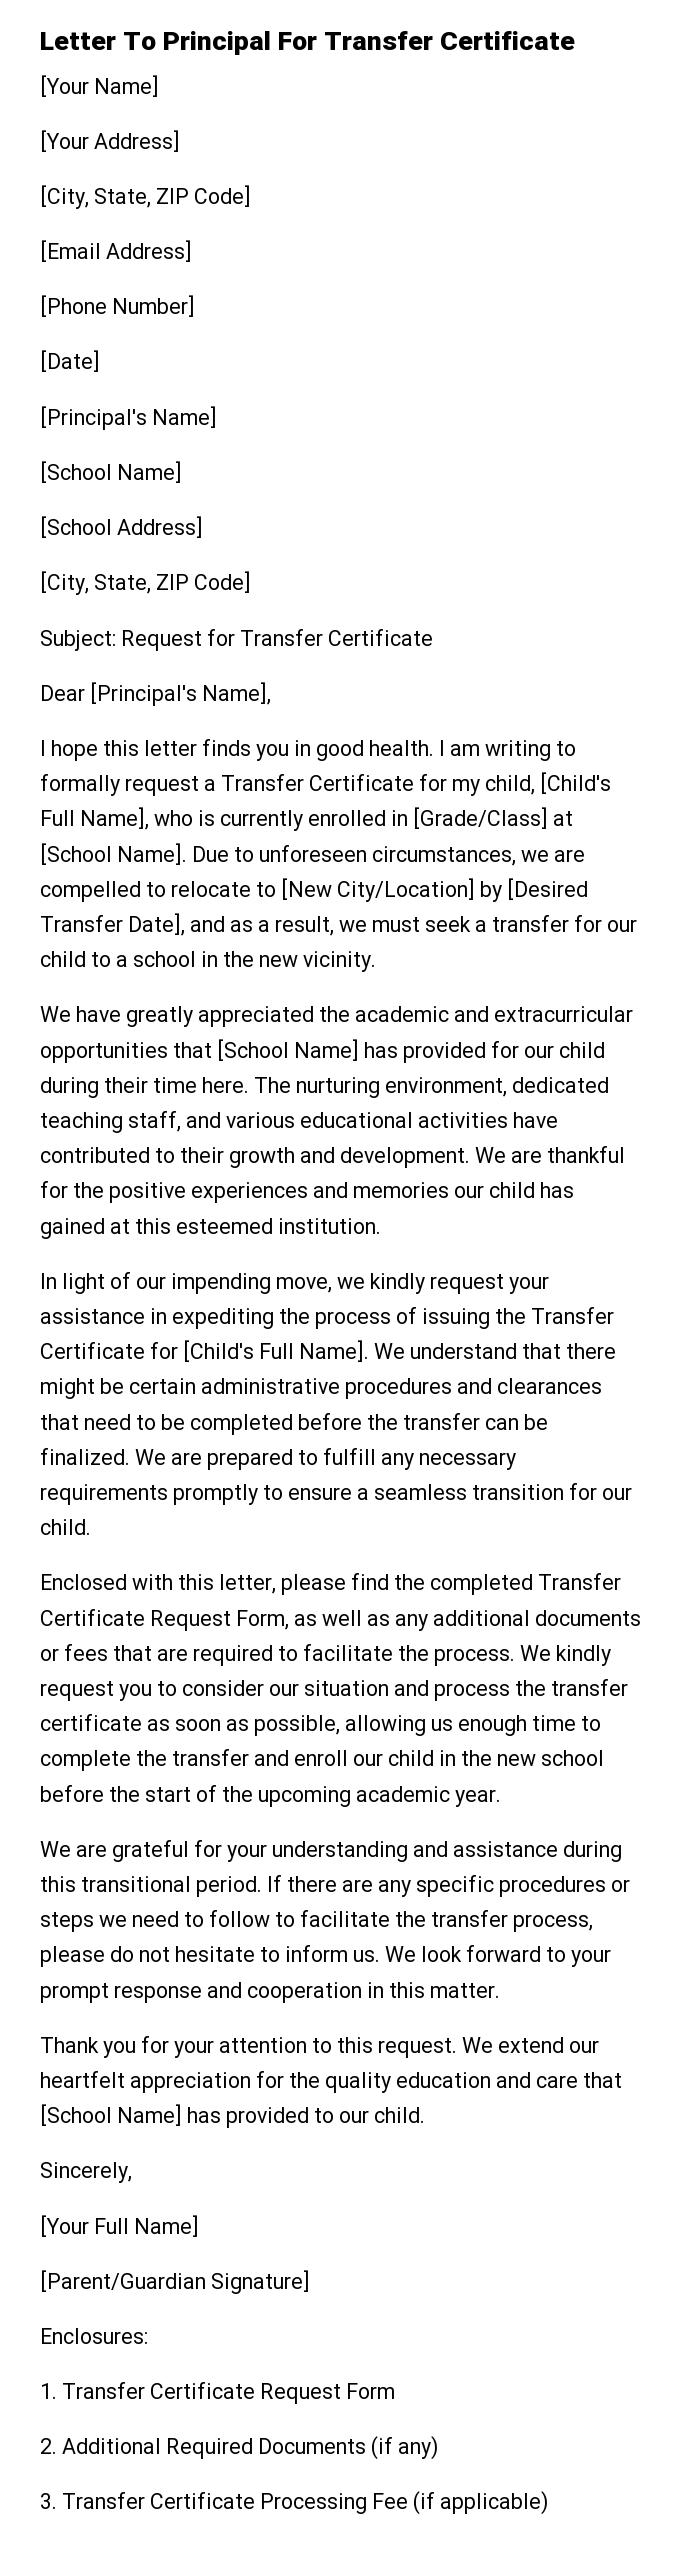 Letter To Principal For Transfer Certificate